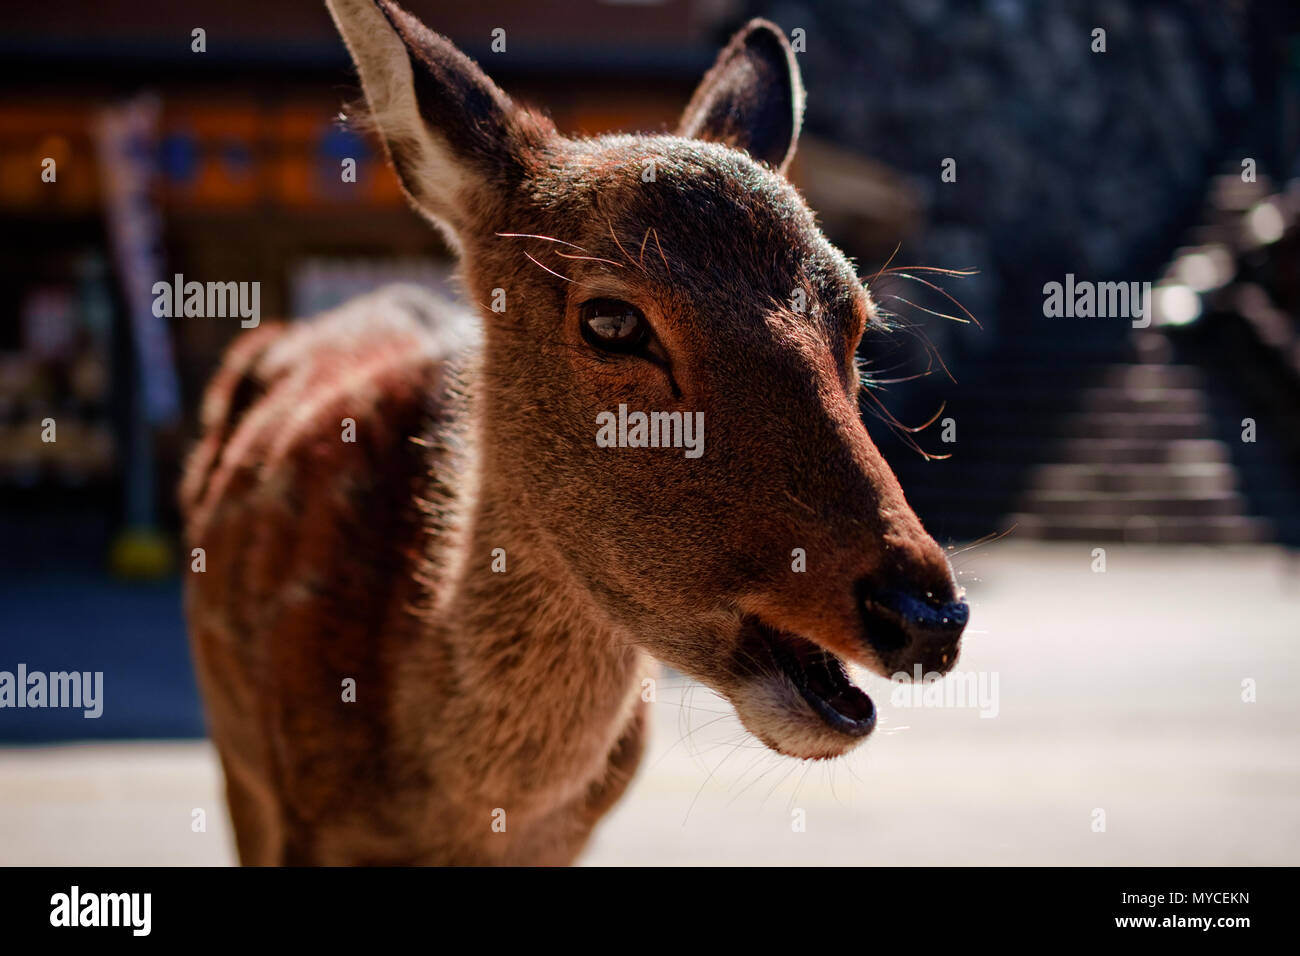 deers were begging and playing in nara park, kyoto Stock Photo